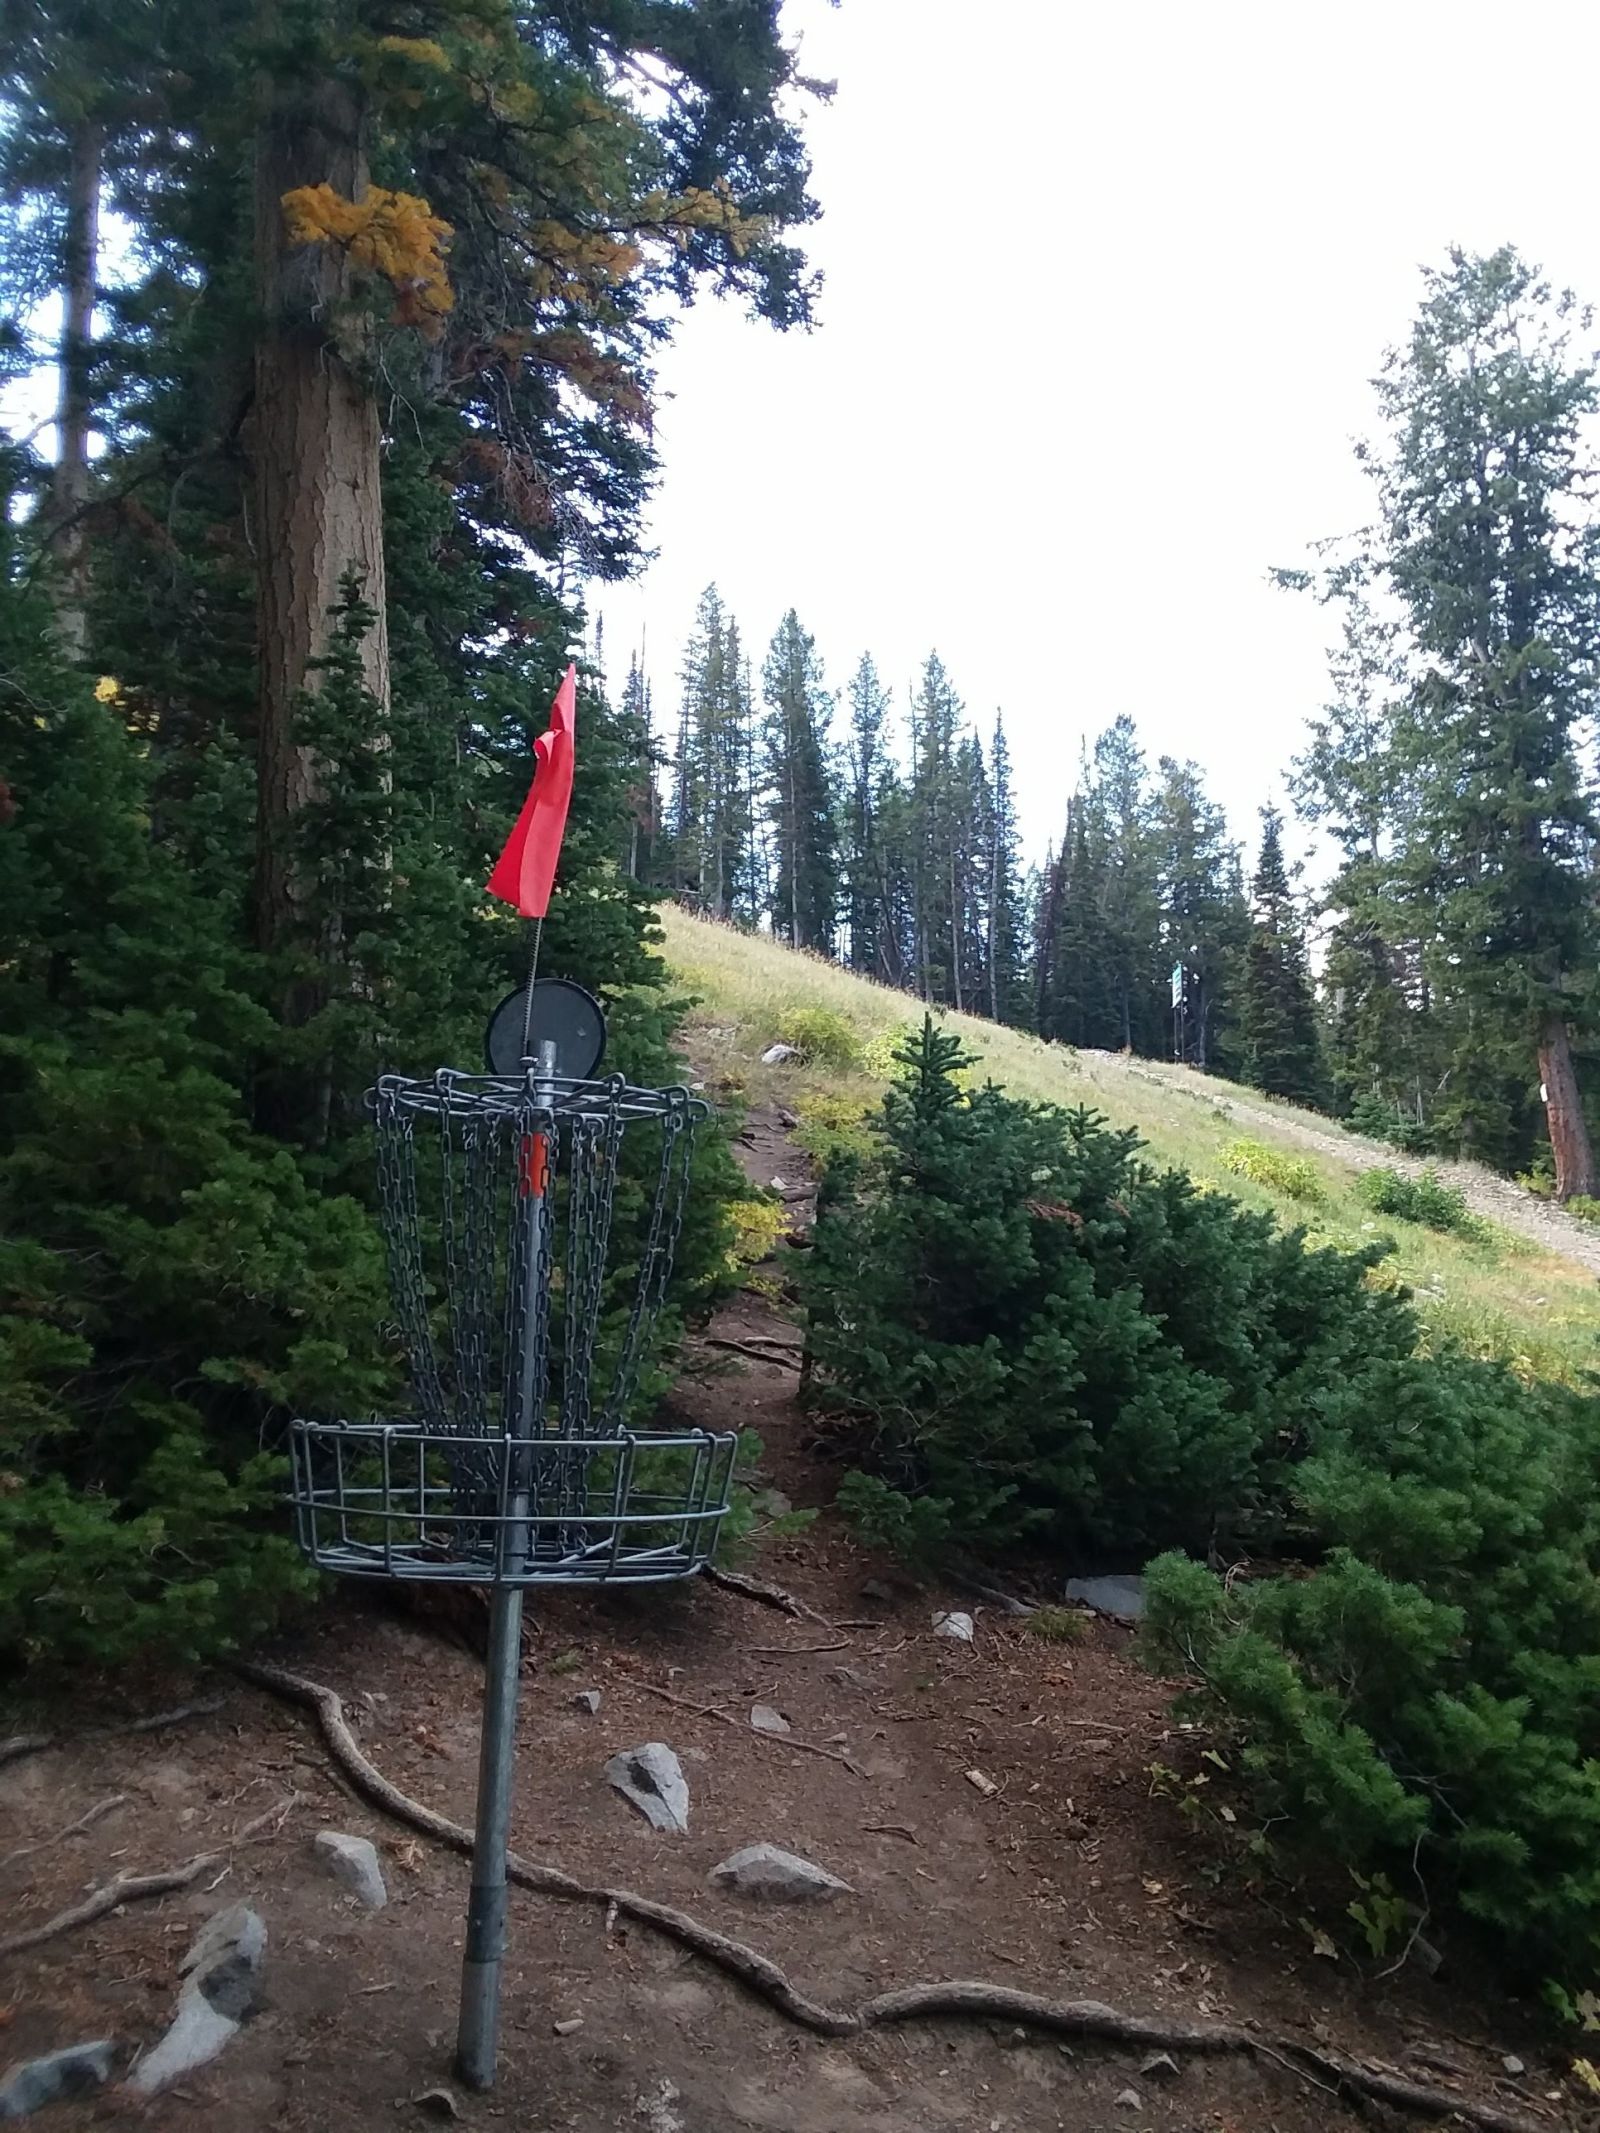 Around noon, I started an amazing round of disc golf and my hike across the mountain for all 18 holes. I had the whole place to myself aside from a few hikers and bikers.